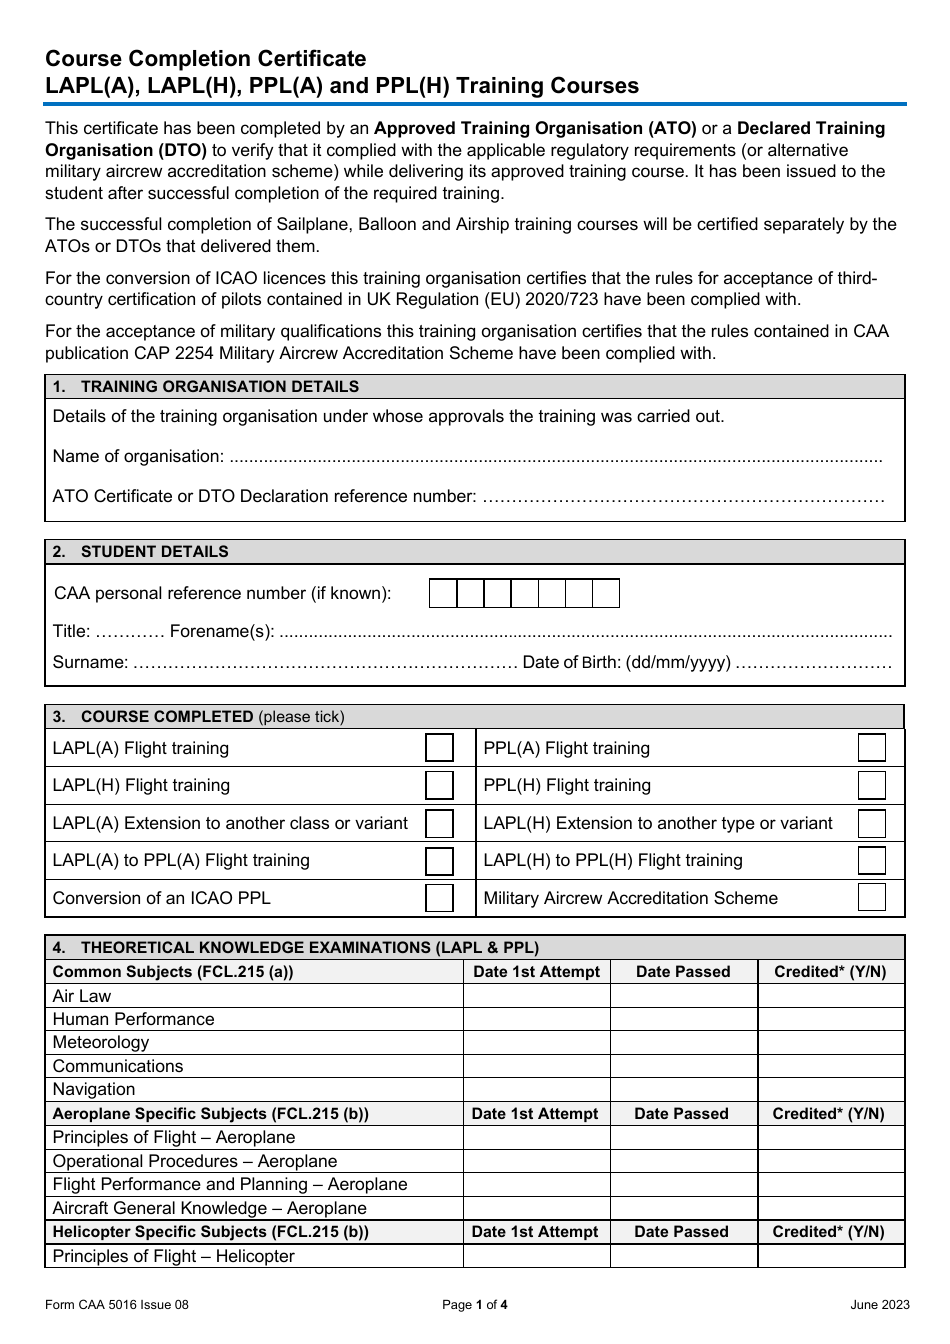 Form CAA5016 Course Completion Certificate - Lapl(A), Lapl(H), Ppl(A) and Ppl(H) Training Courses - United Kingdom, Page 1